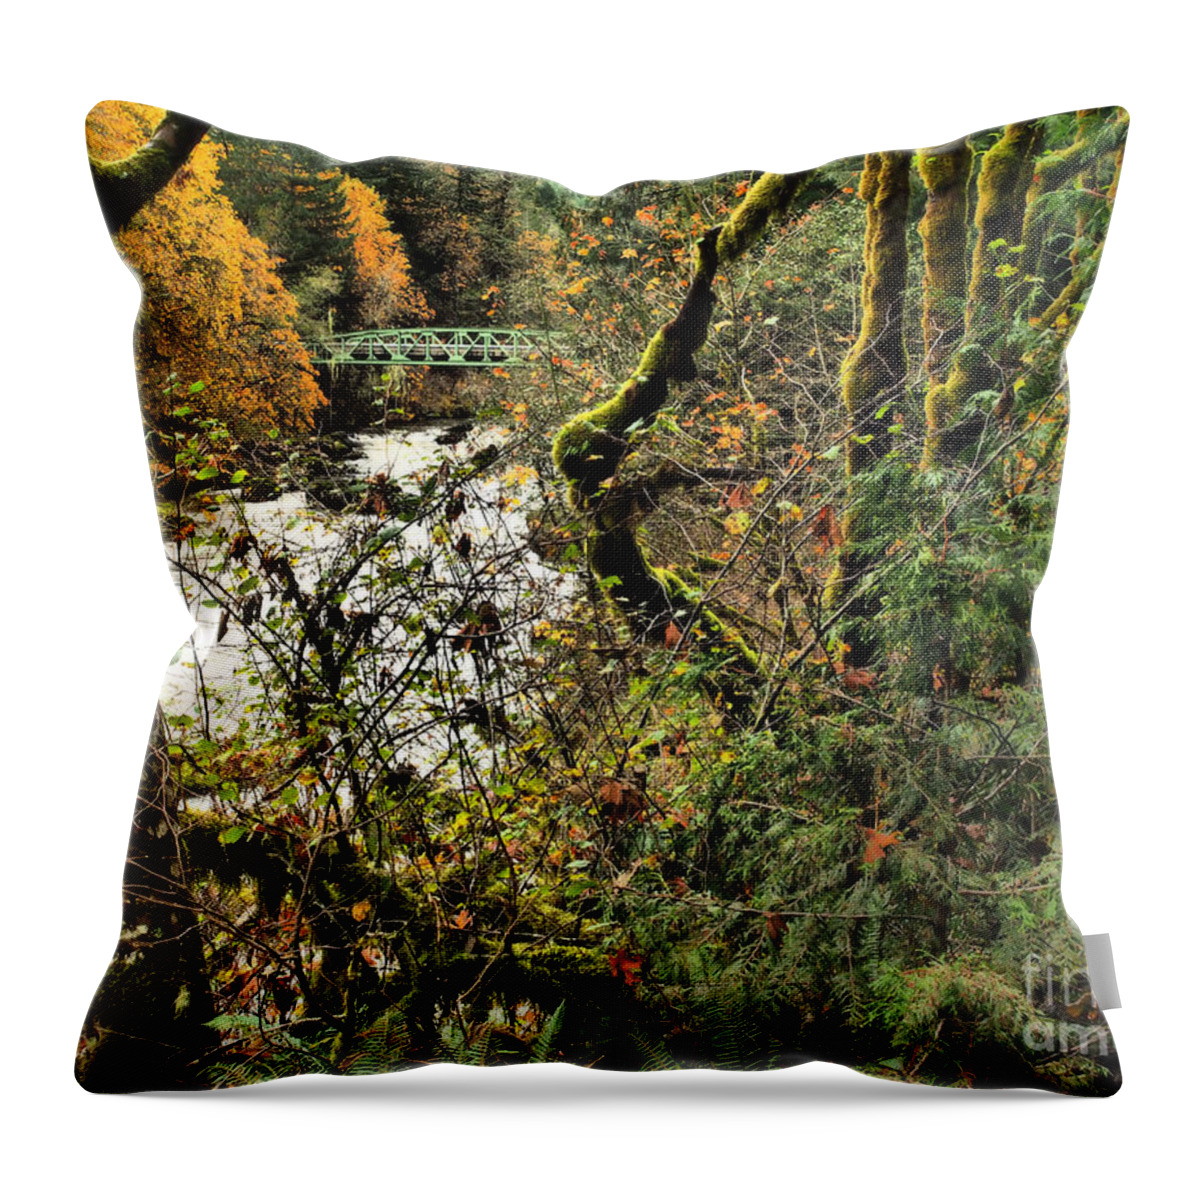 Bridge Throw Pillow featuring the photograph Passage by Parrish Todd